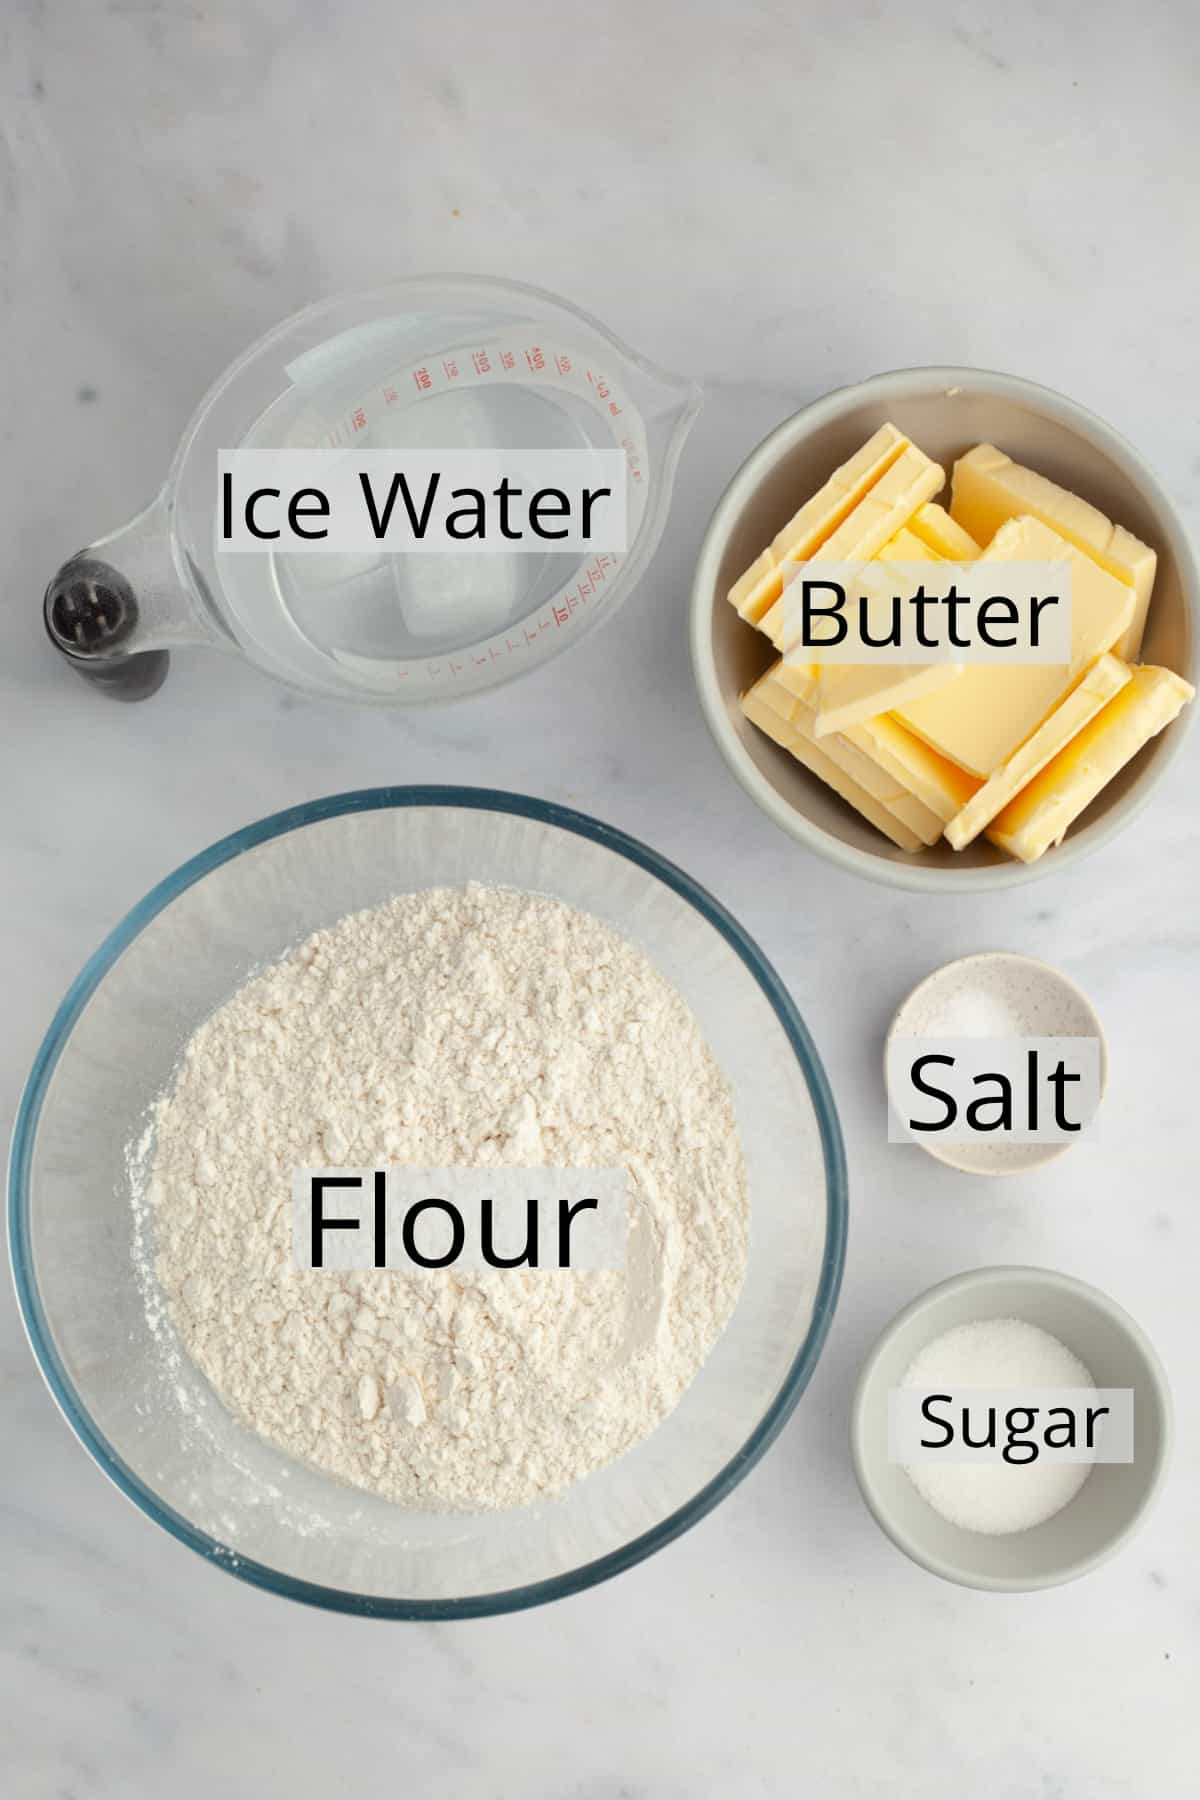 All the ingredients needed to make a pie crust weighed out into small bowls.